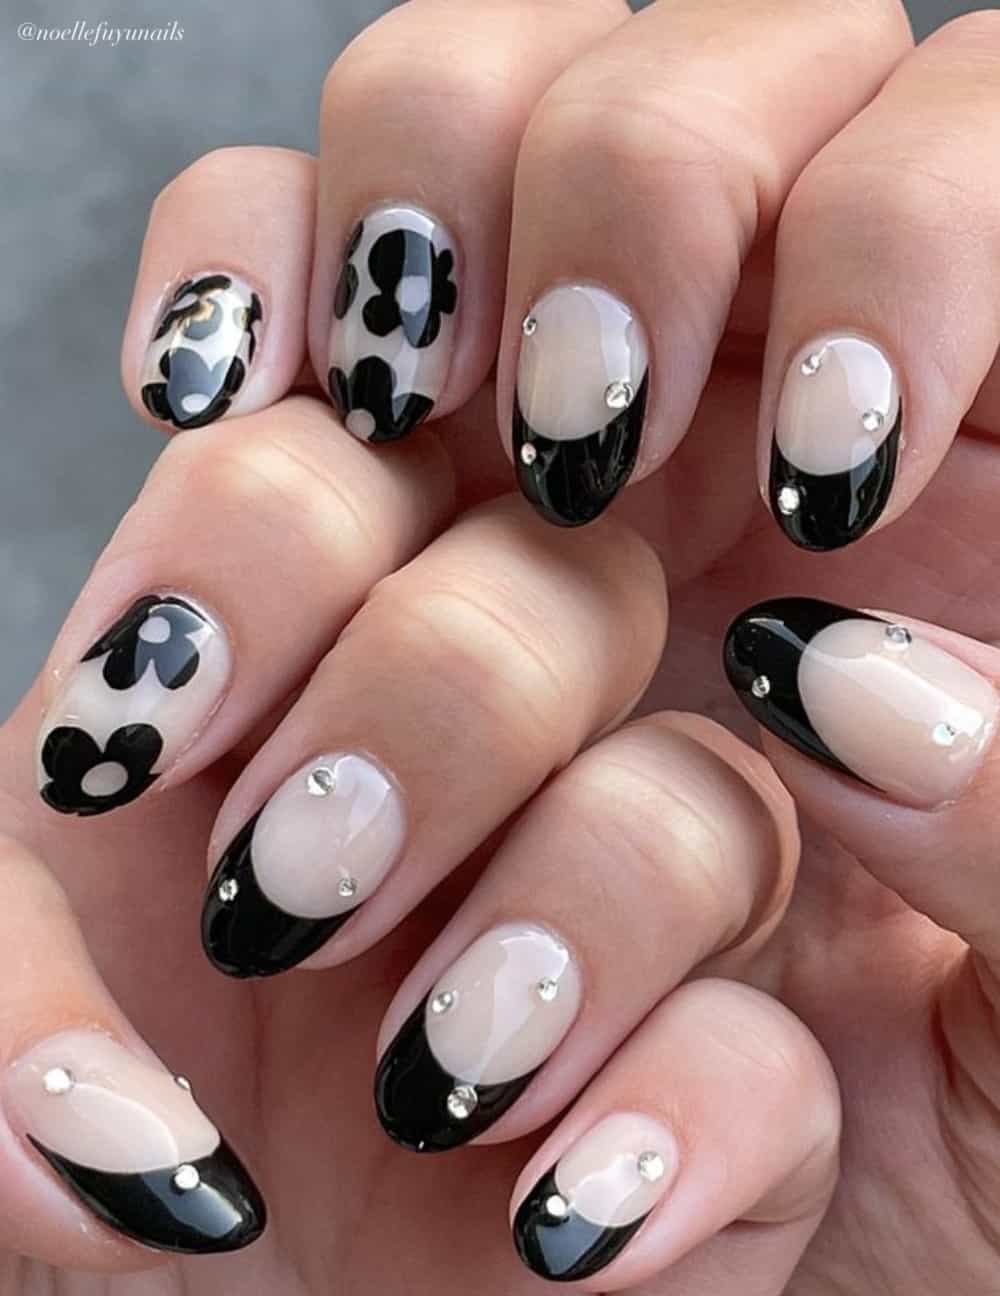 A hand with short round nails with a milky white base, black French tips, black flower nail art, and crystal accents